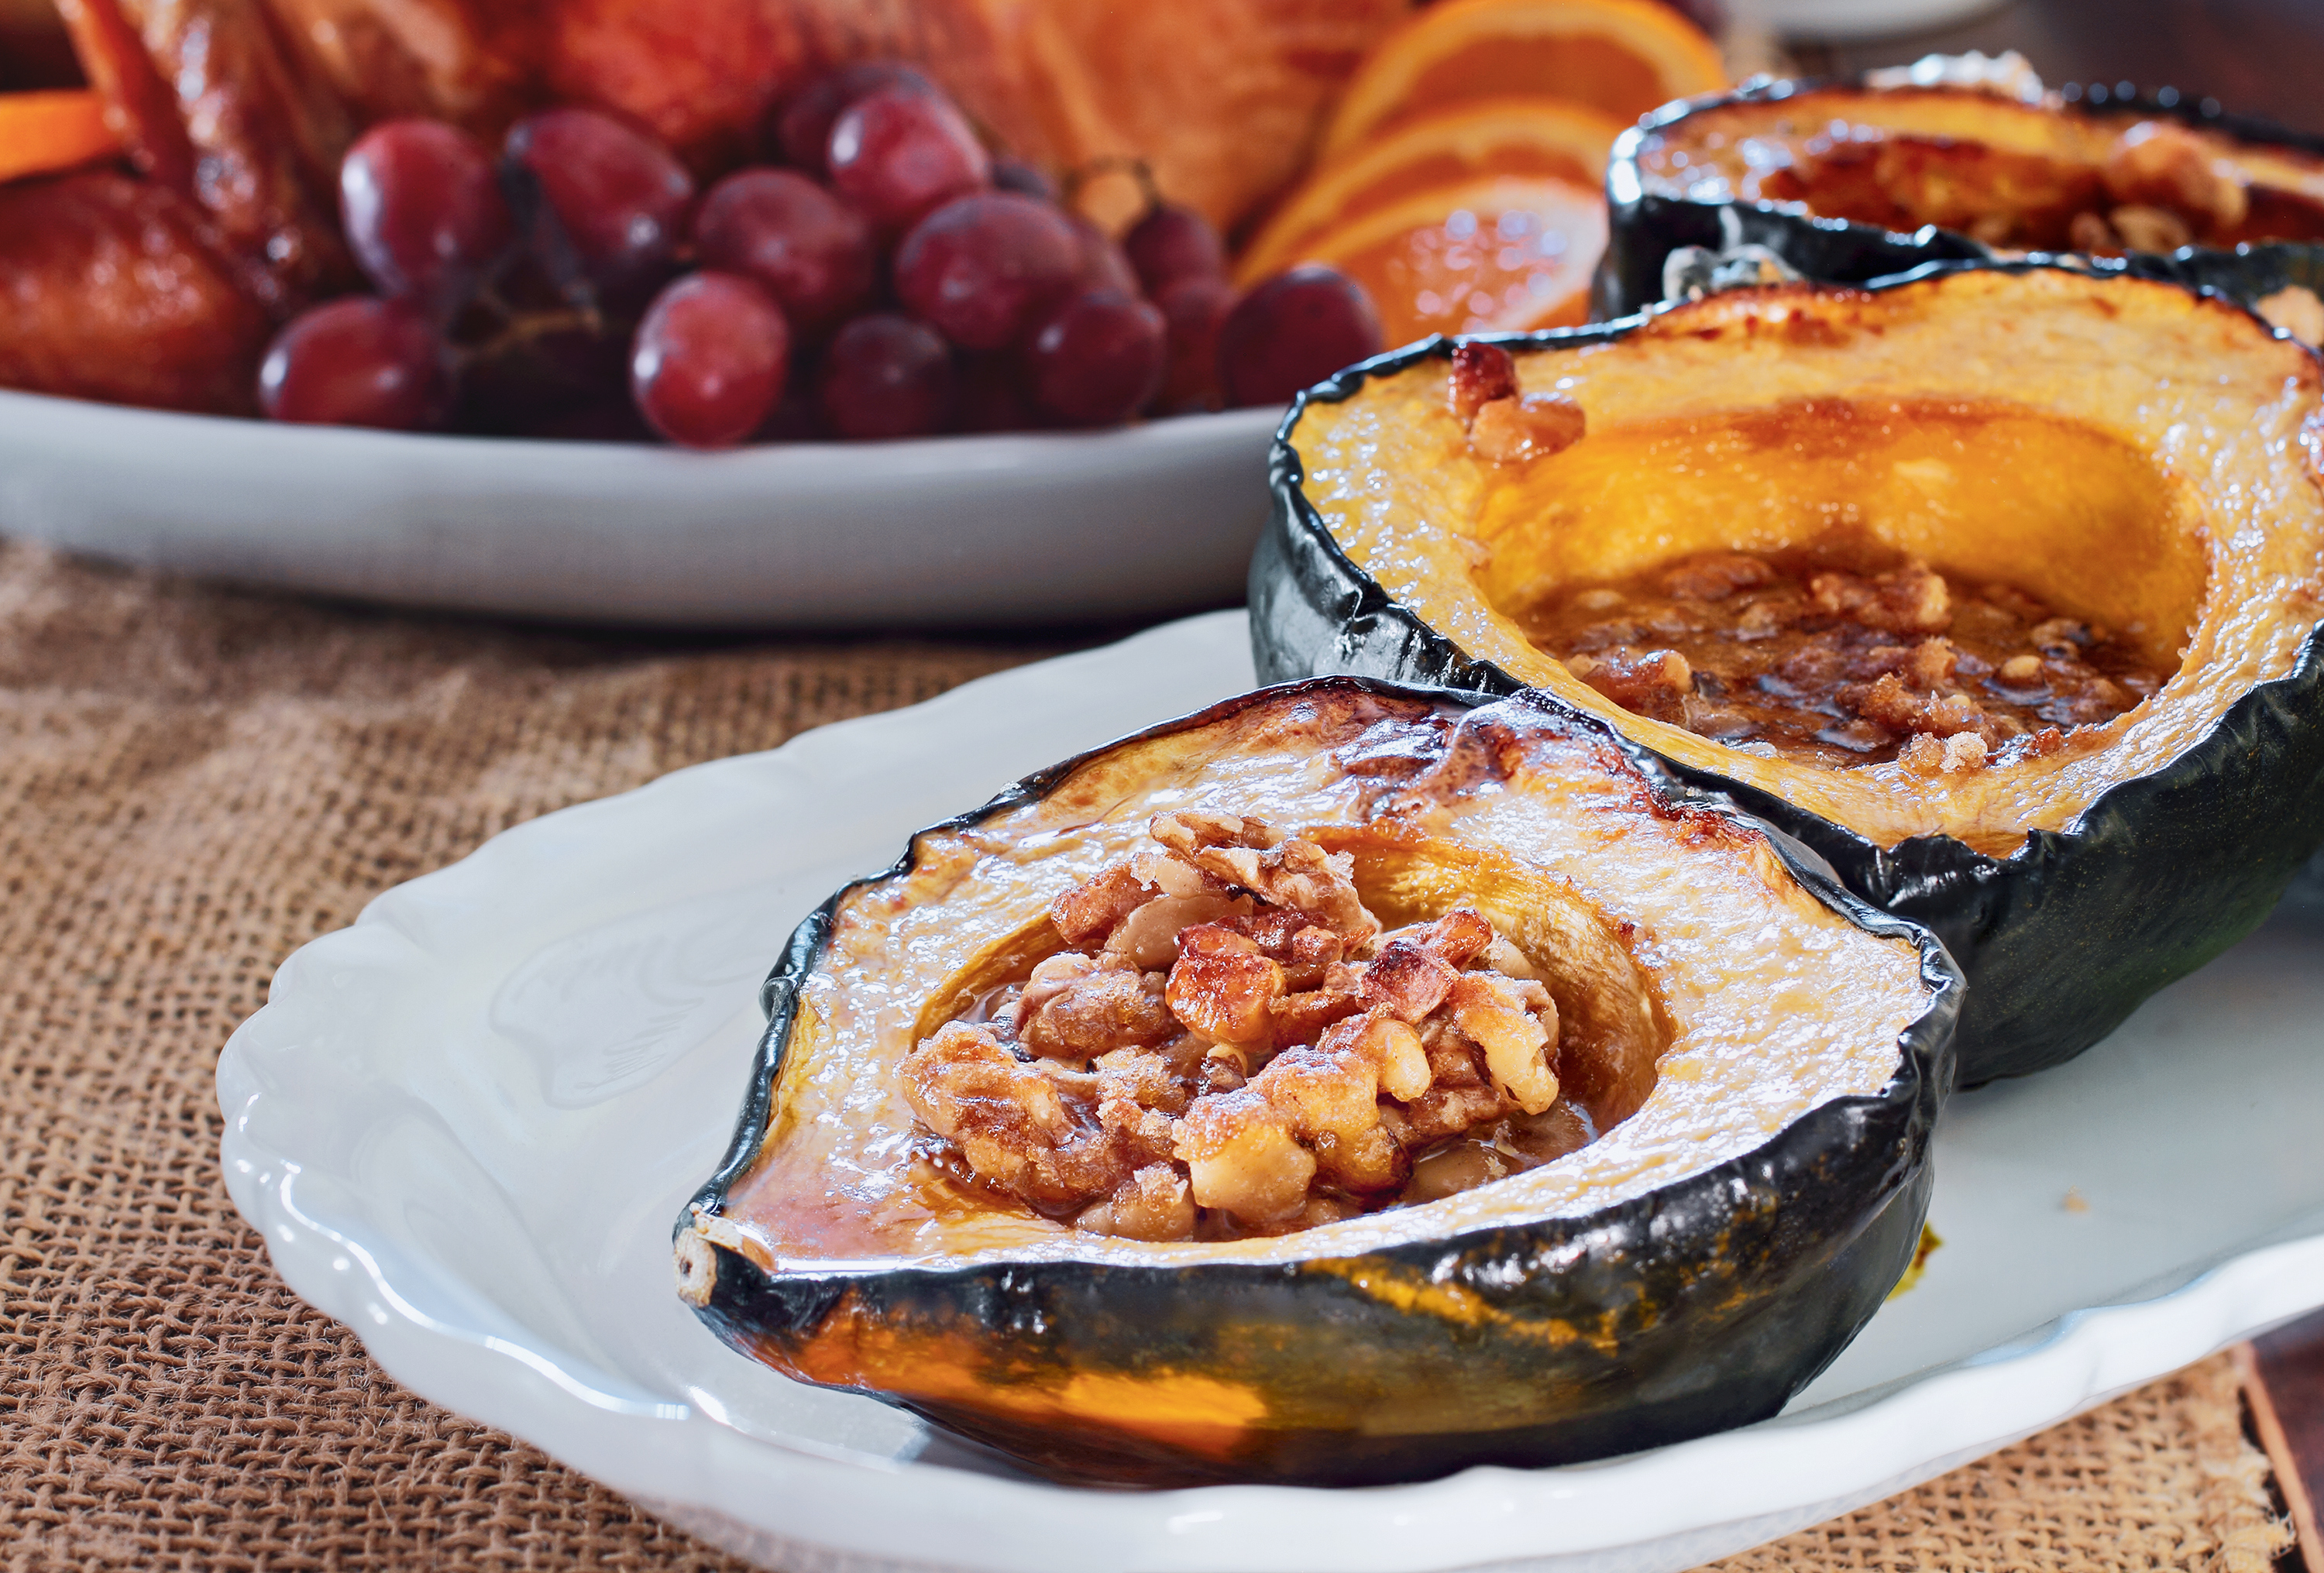 Baked Acorn Squash With Walnuts